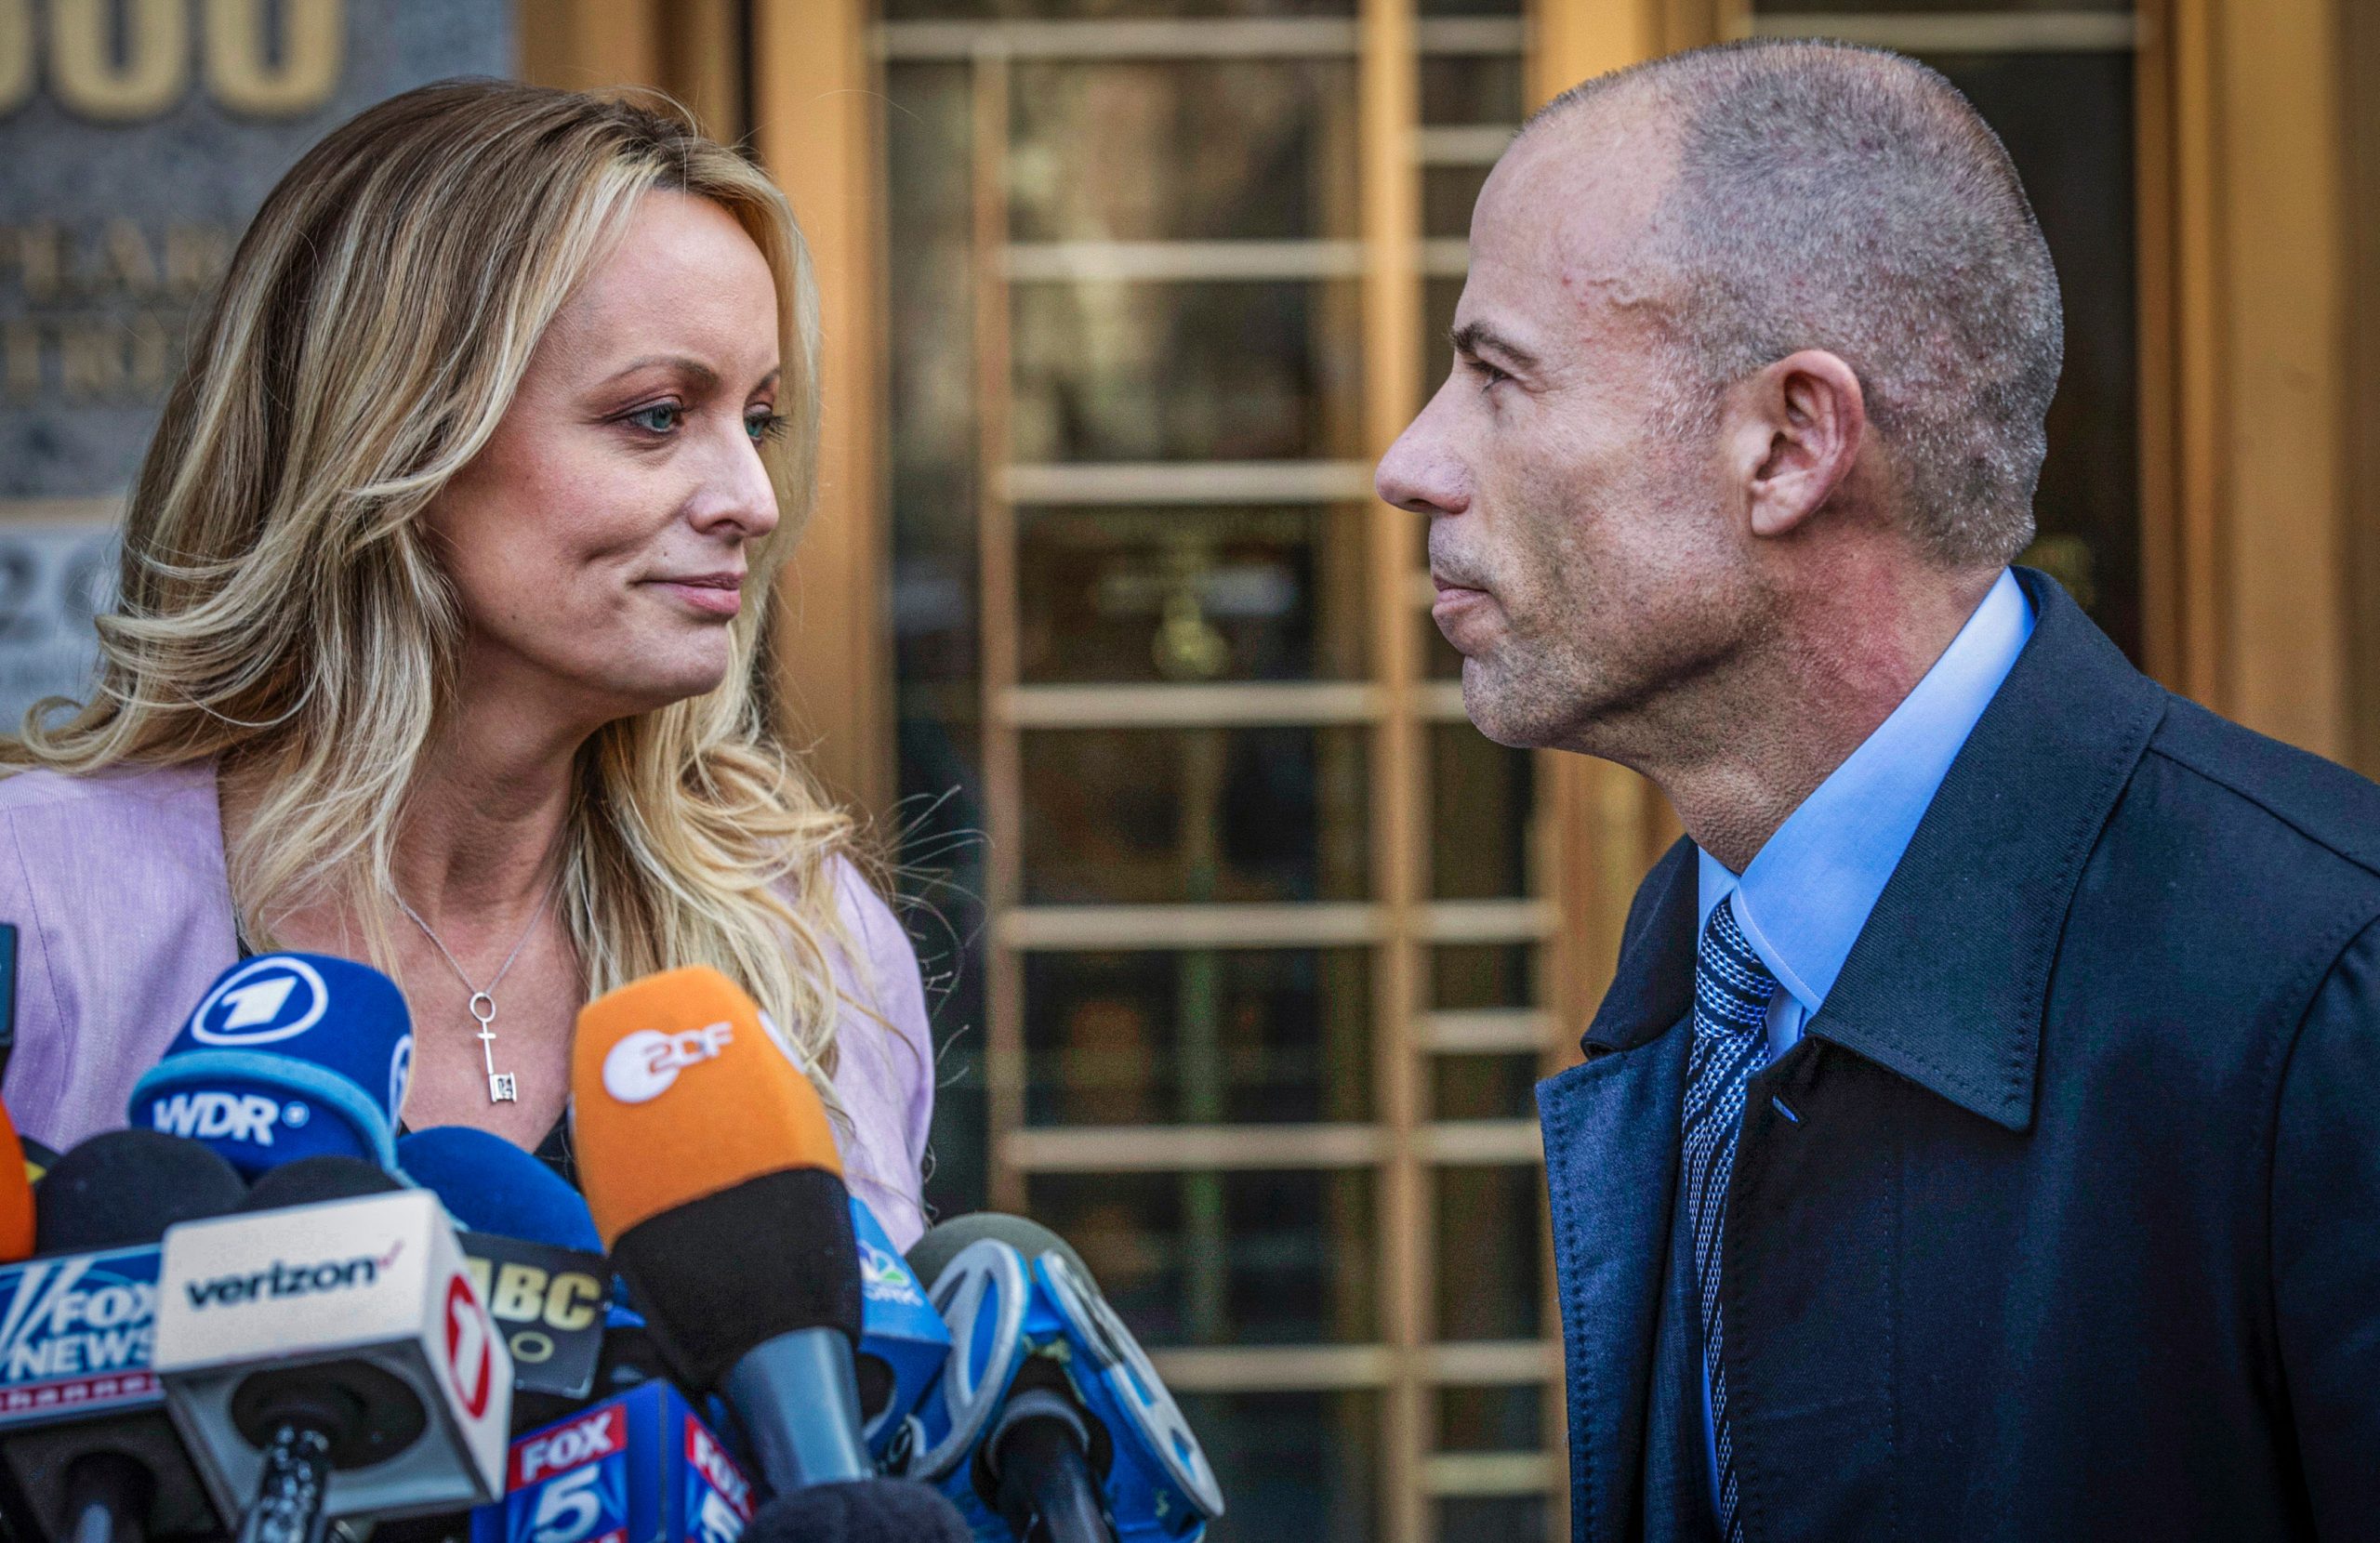 Stormy Daniels lawyer Micahel Avenatti found guilty of fraud over Donald Trump book compensation